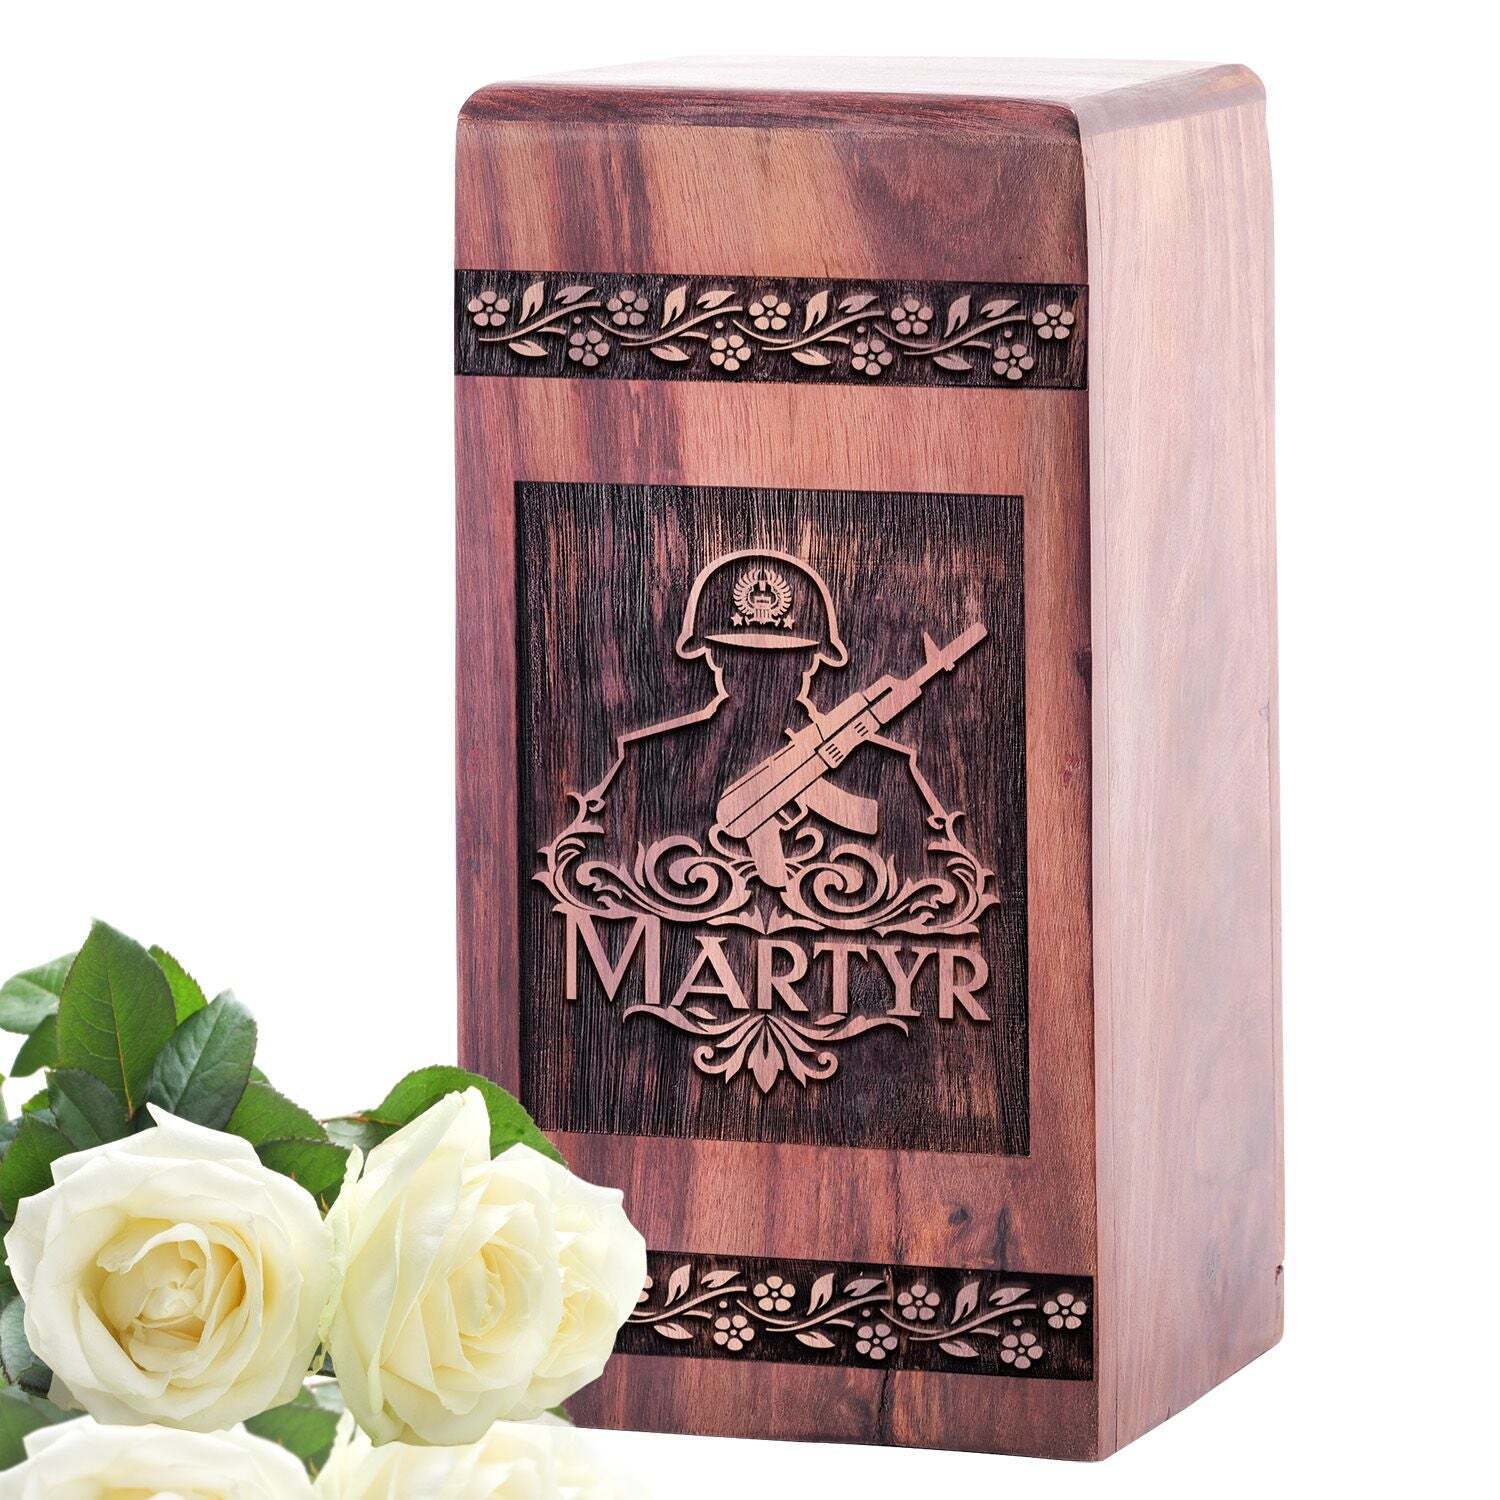 Peaceful Rest - Wooden Cremation Urns for Adult Ashes